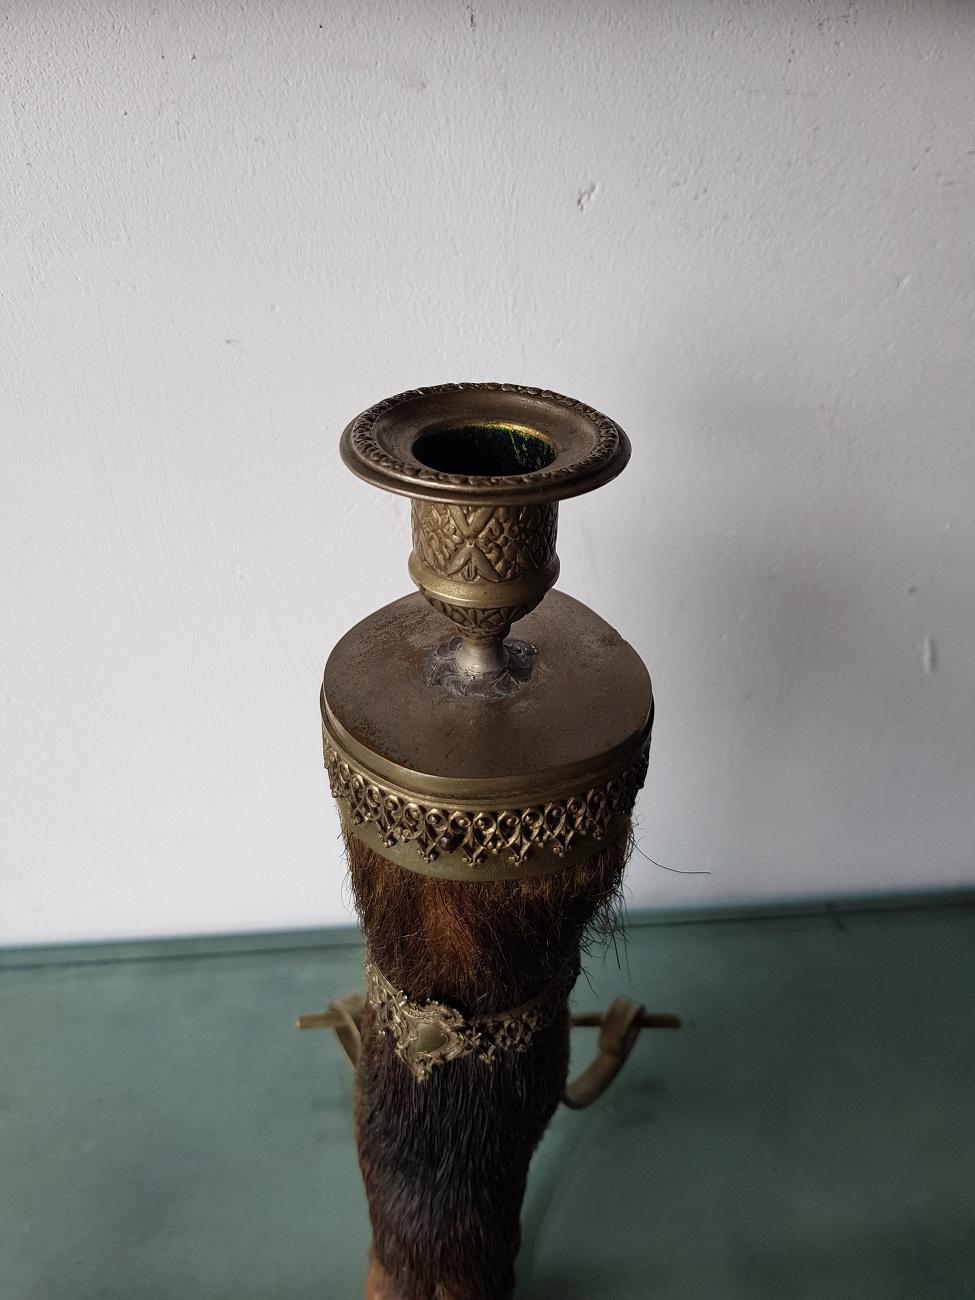 French deer leg made in to a candlestick with classic shaped metal ornaments, first half of the 20th century.

The measurements are,
Depth 13 cm/ 5.1 inch.
Width 12.5 cm/ 4.9 inch.
Height 25.5 cm/ 10 inch.
 